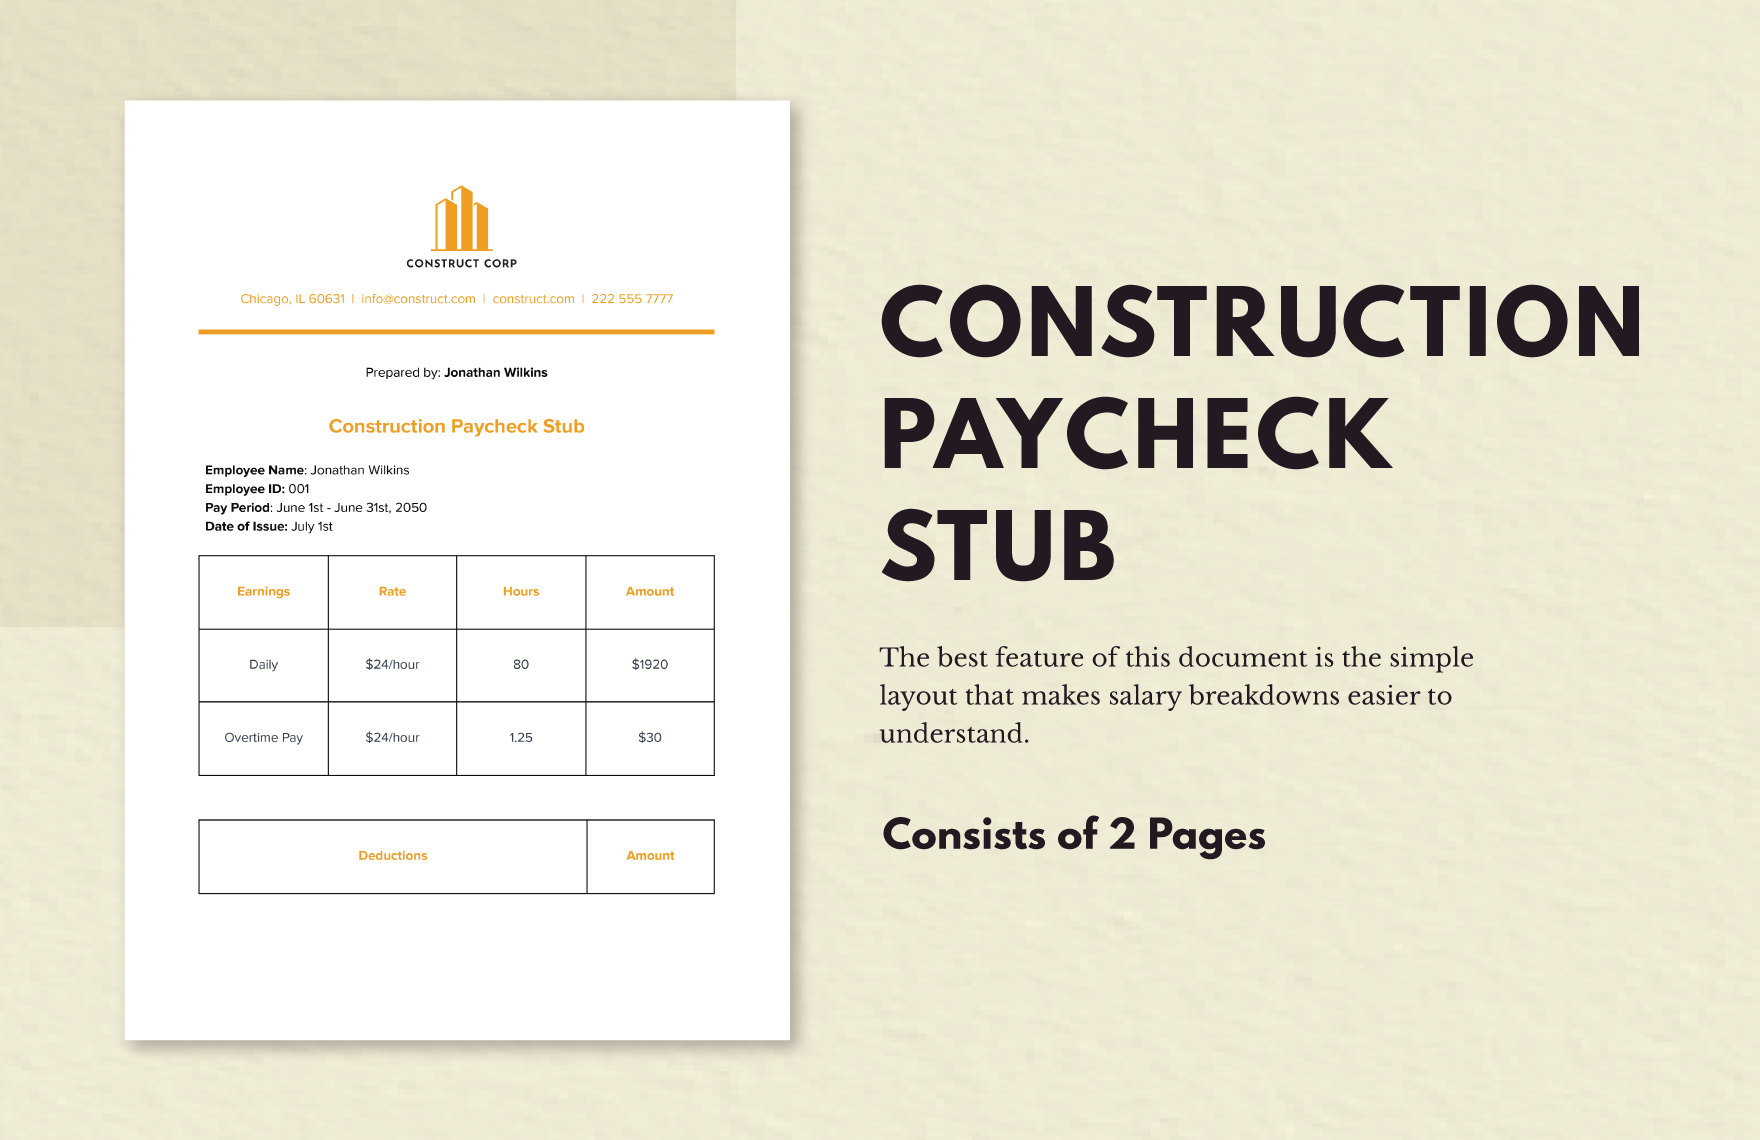 Construction Paycheck Stub in Word, Google Docs